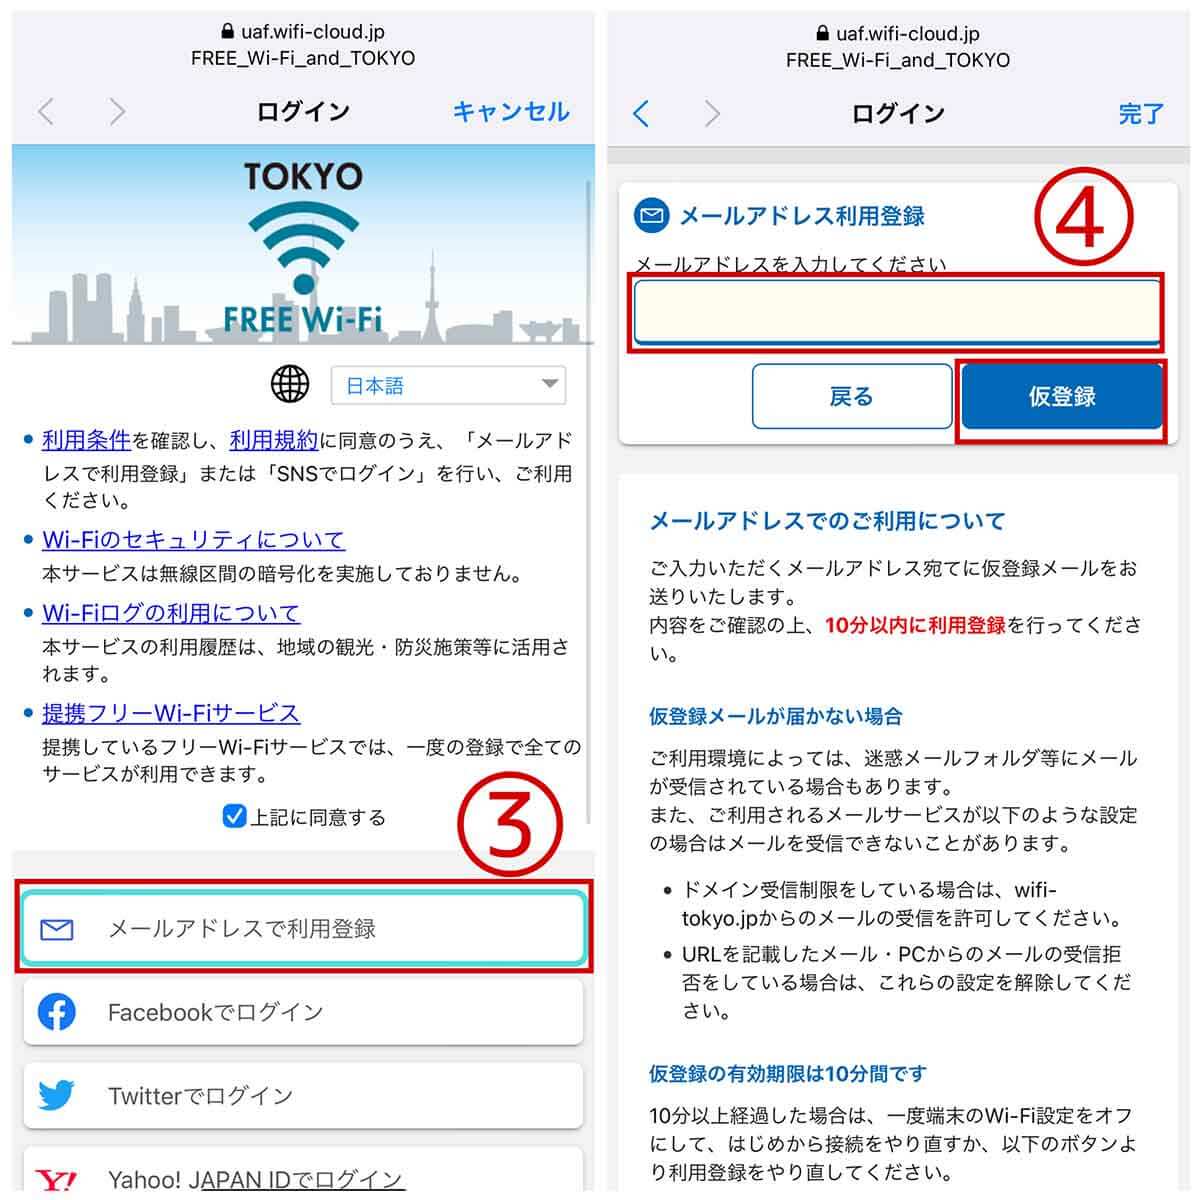 FREE_Wi-Fi_and_TOKYO2